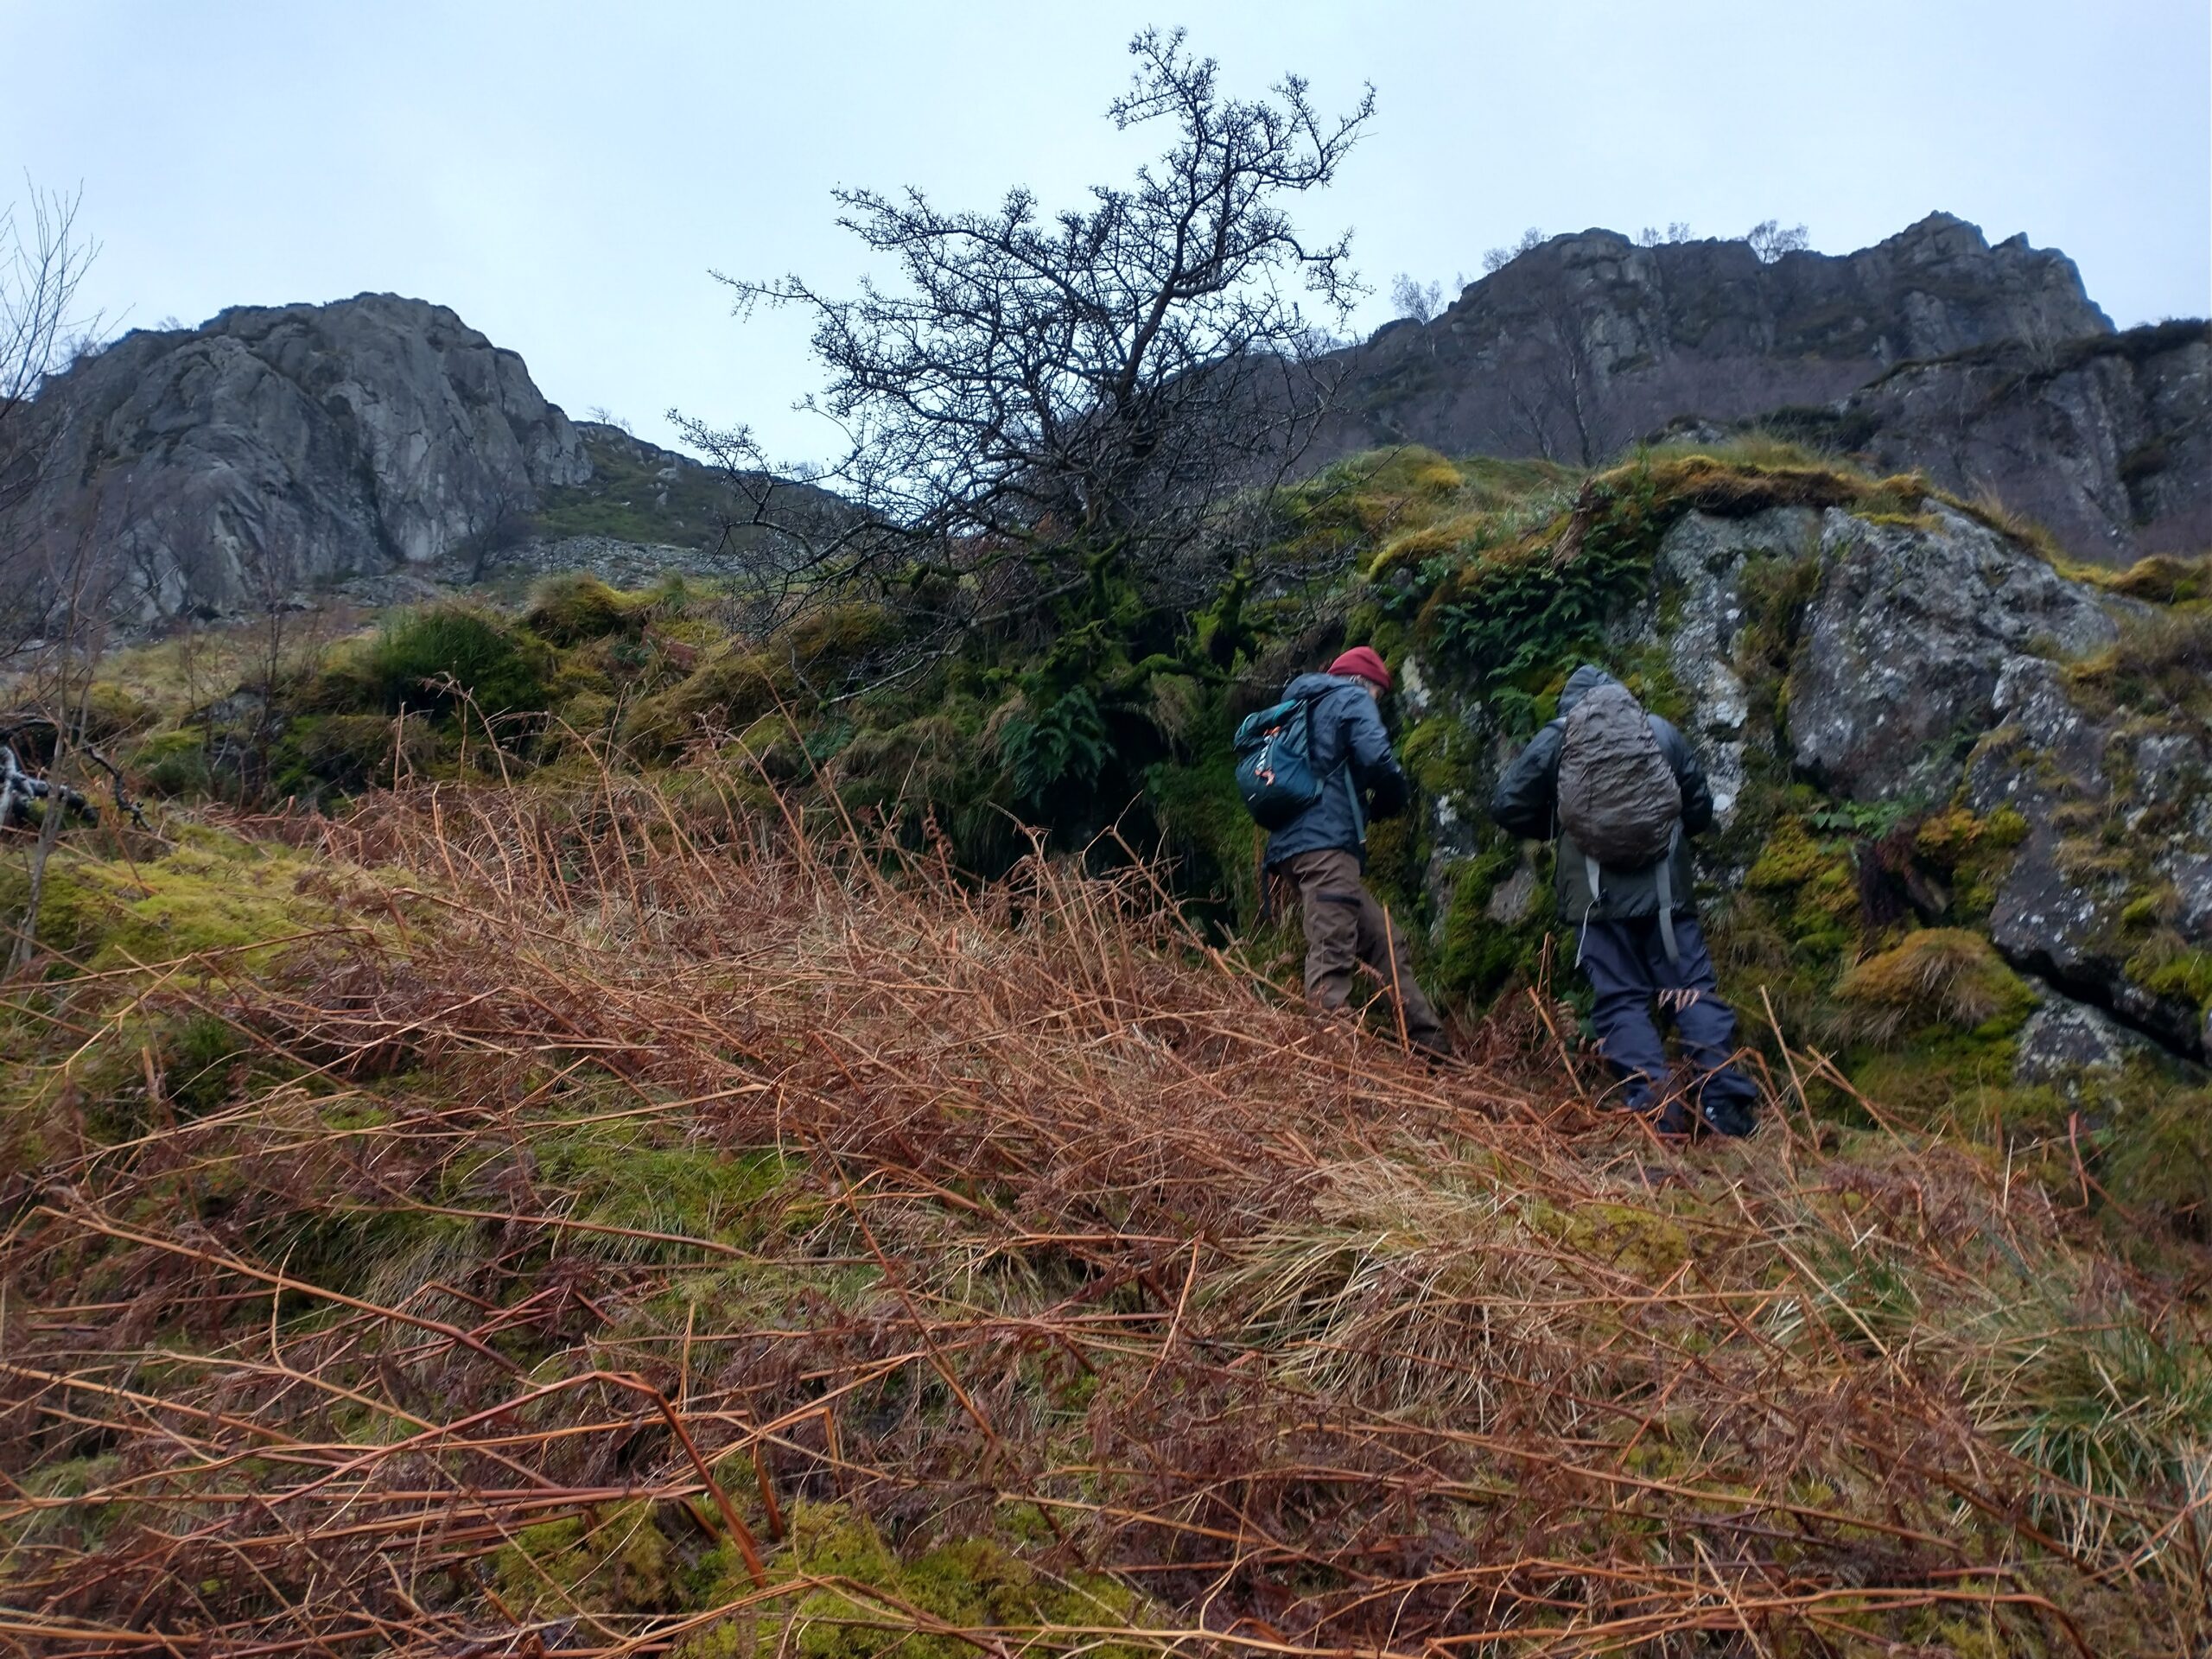 Below the crags, examining a mossy outcrop